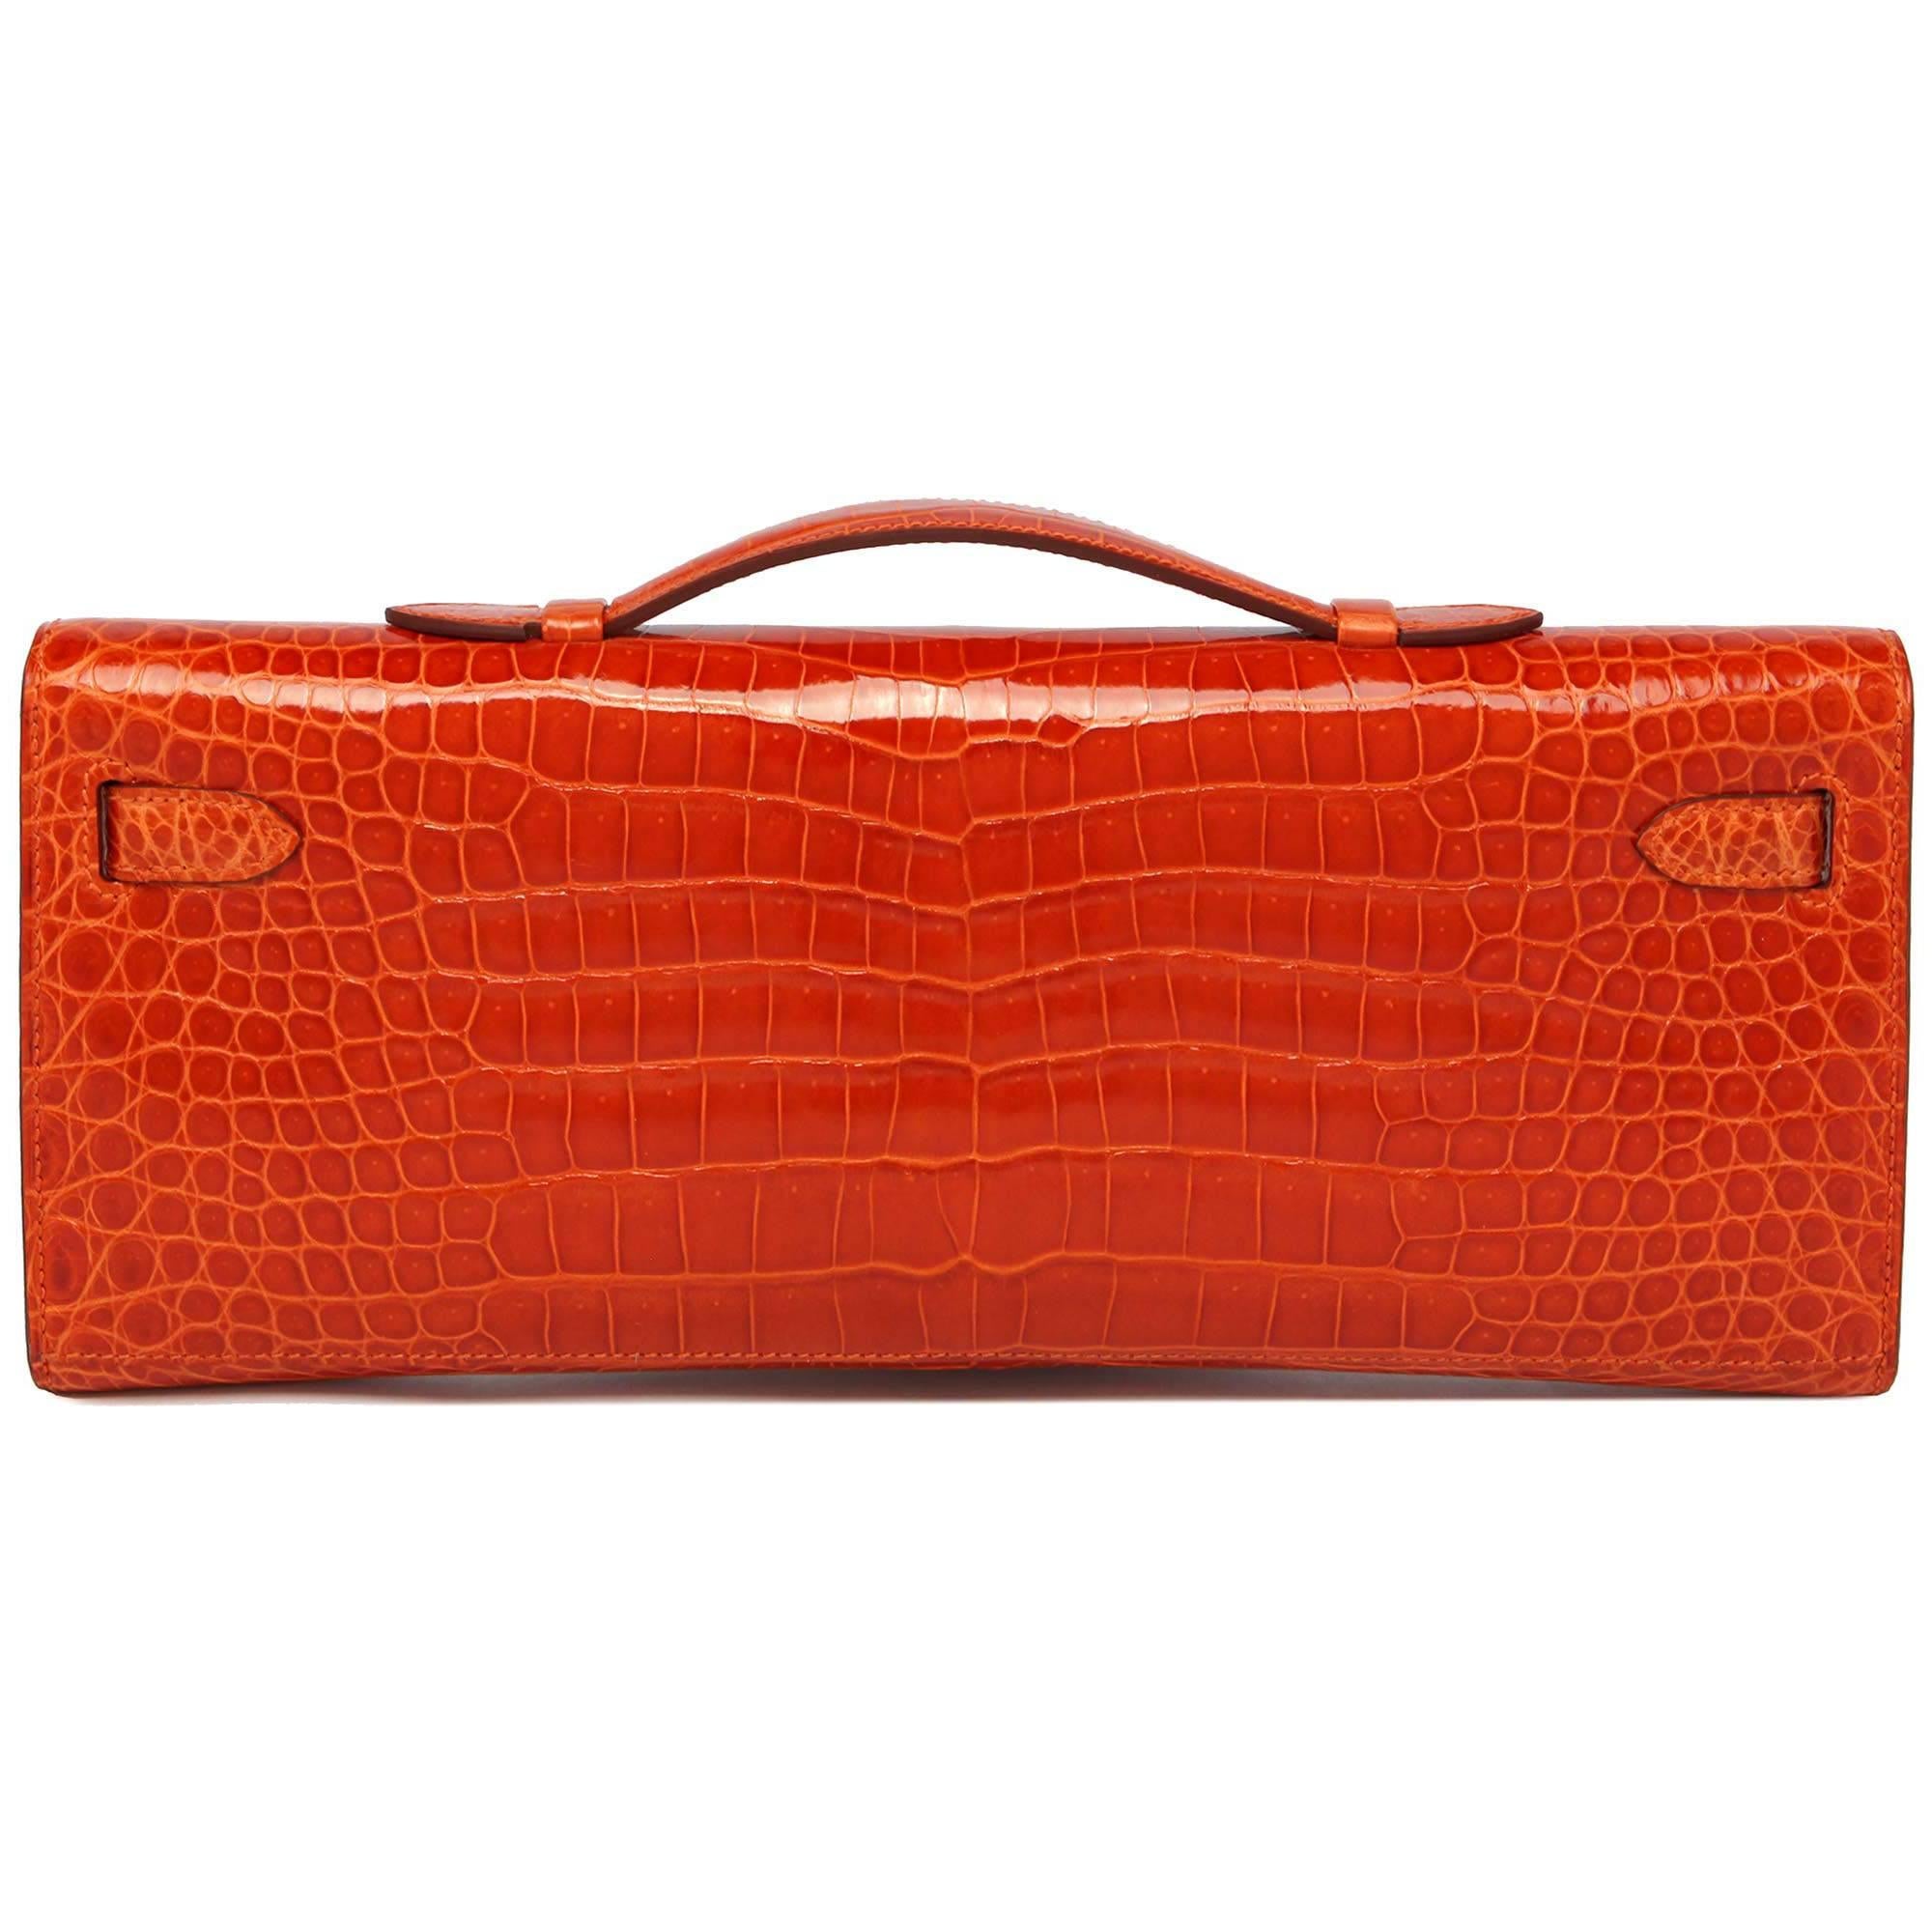 This Kelly Cut has become increasingly popular.  The signature Hermes orange makes it even more desirable being one of the fashion colours of the Summer.